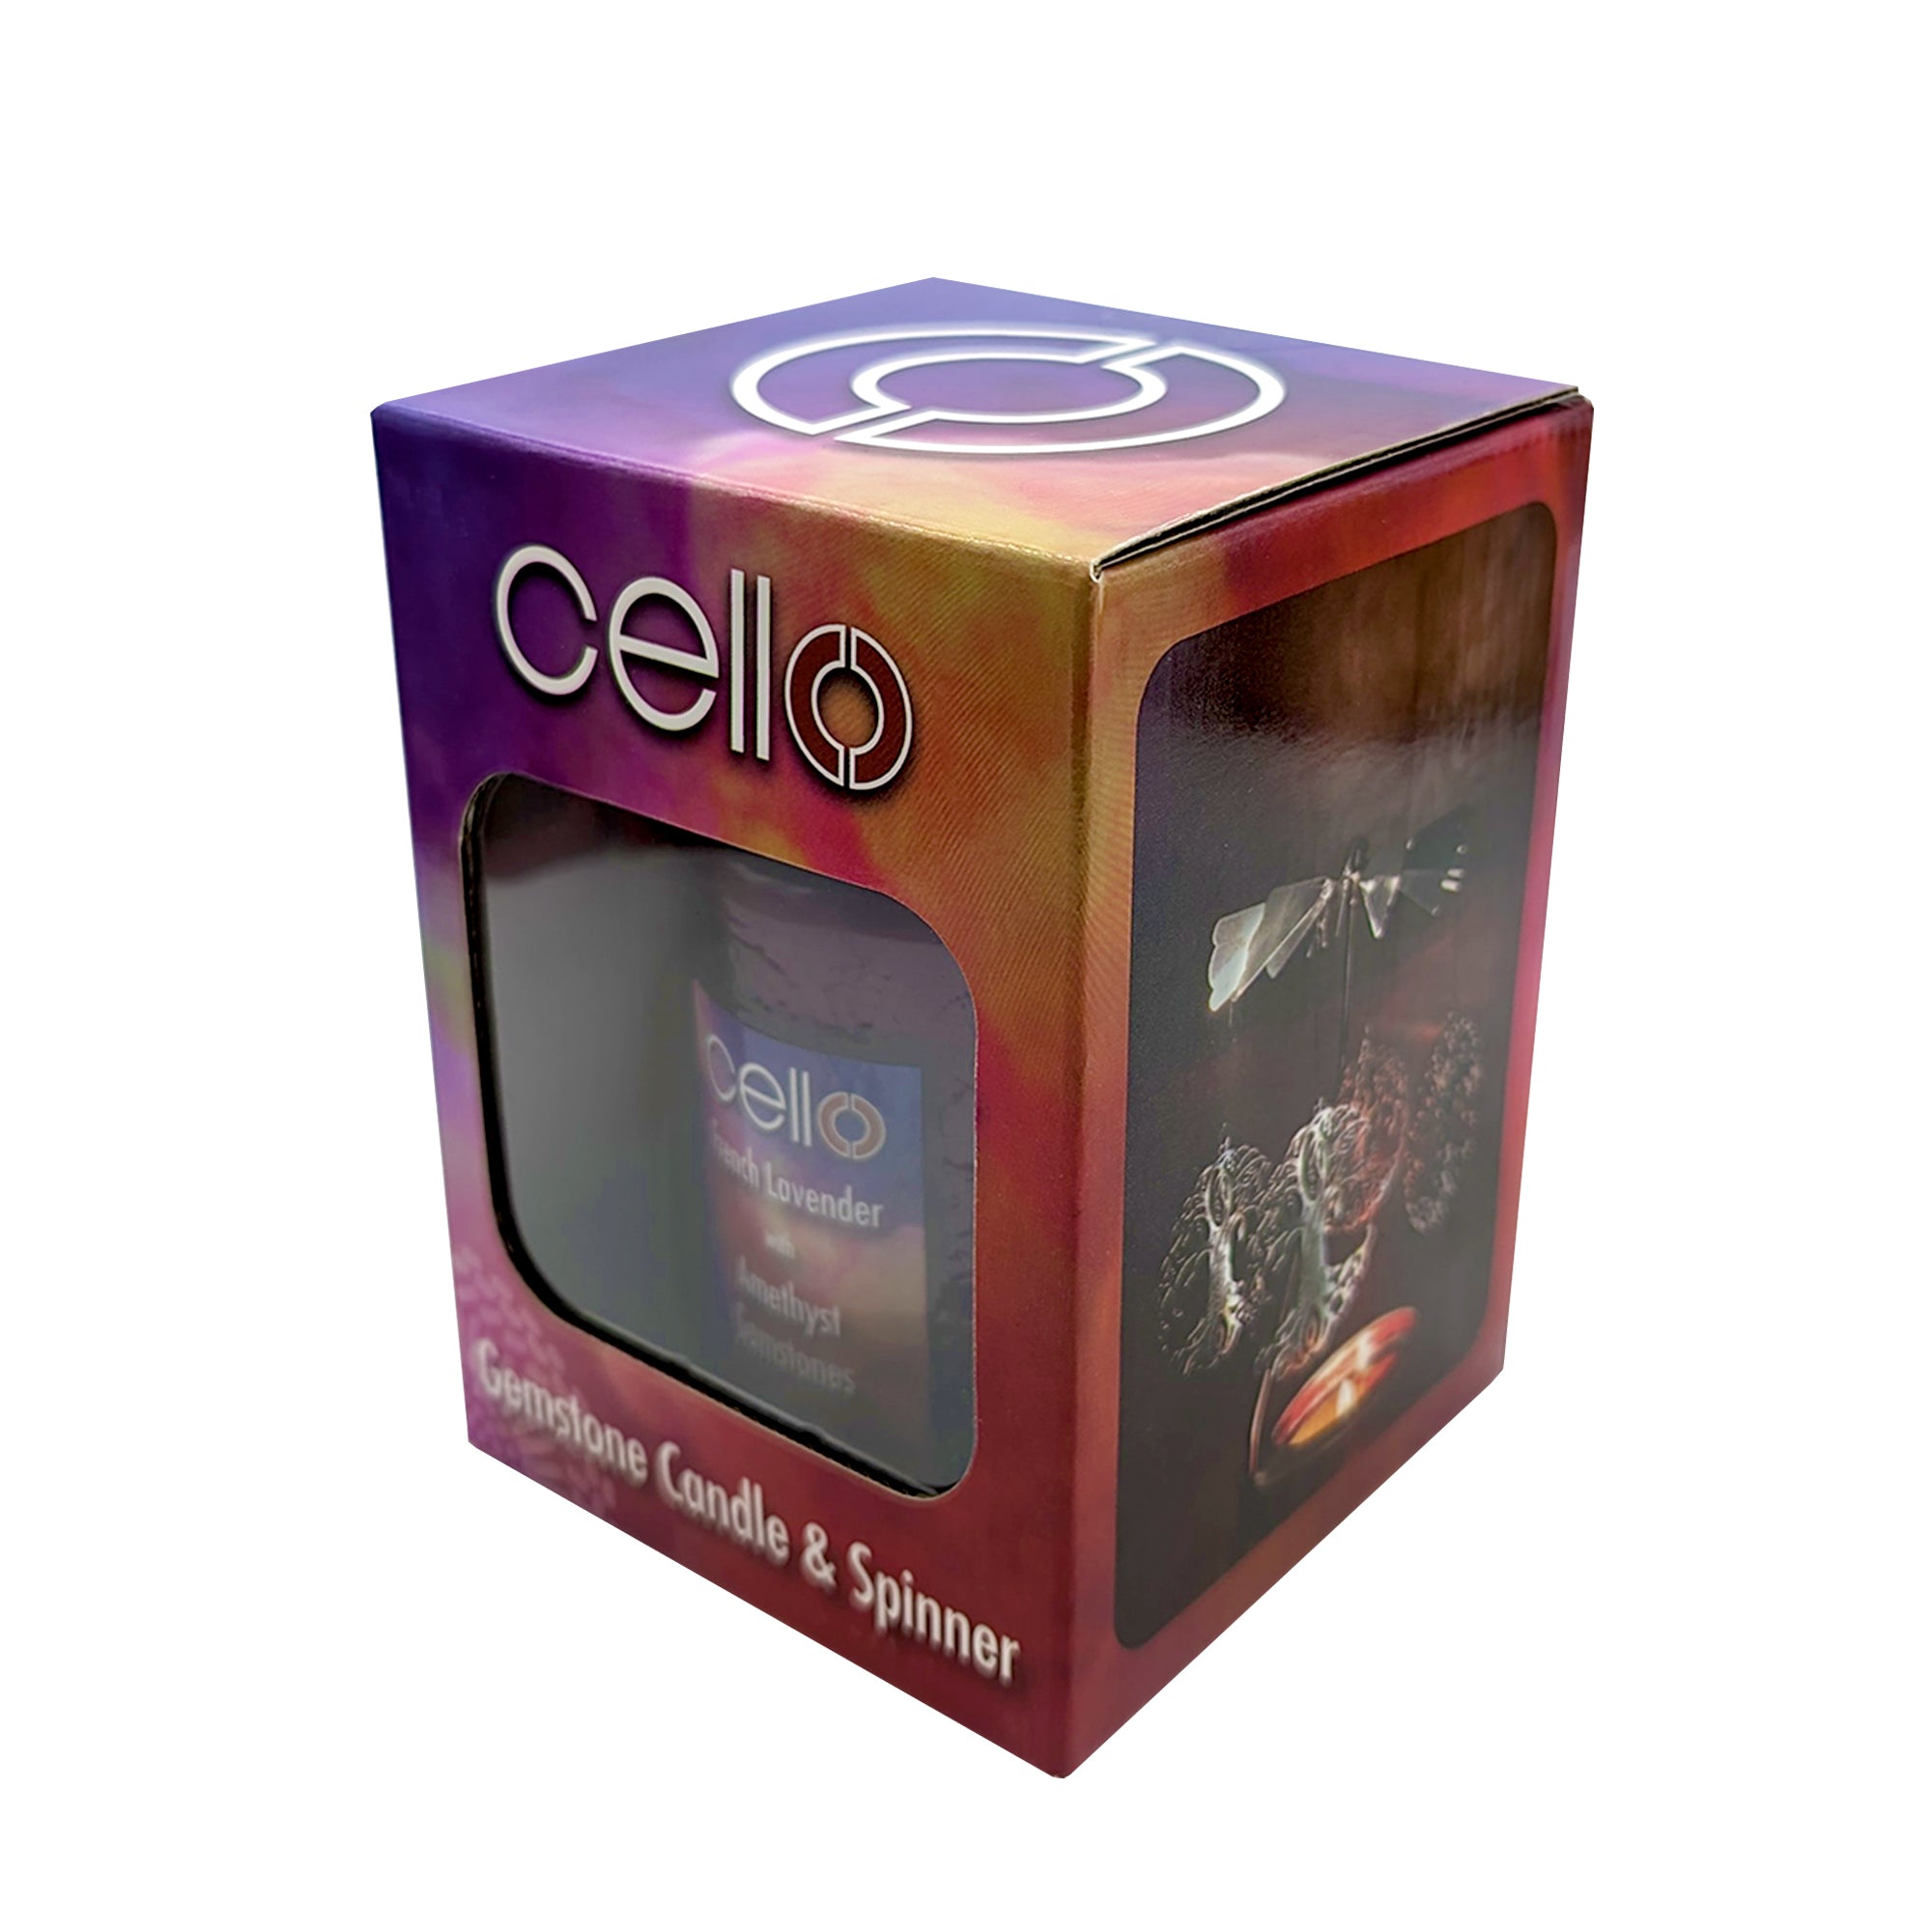 Cello - Gemstone Candle 200g with Convection Spinner - French Lavender with Amethyst